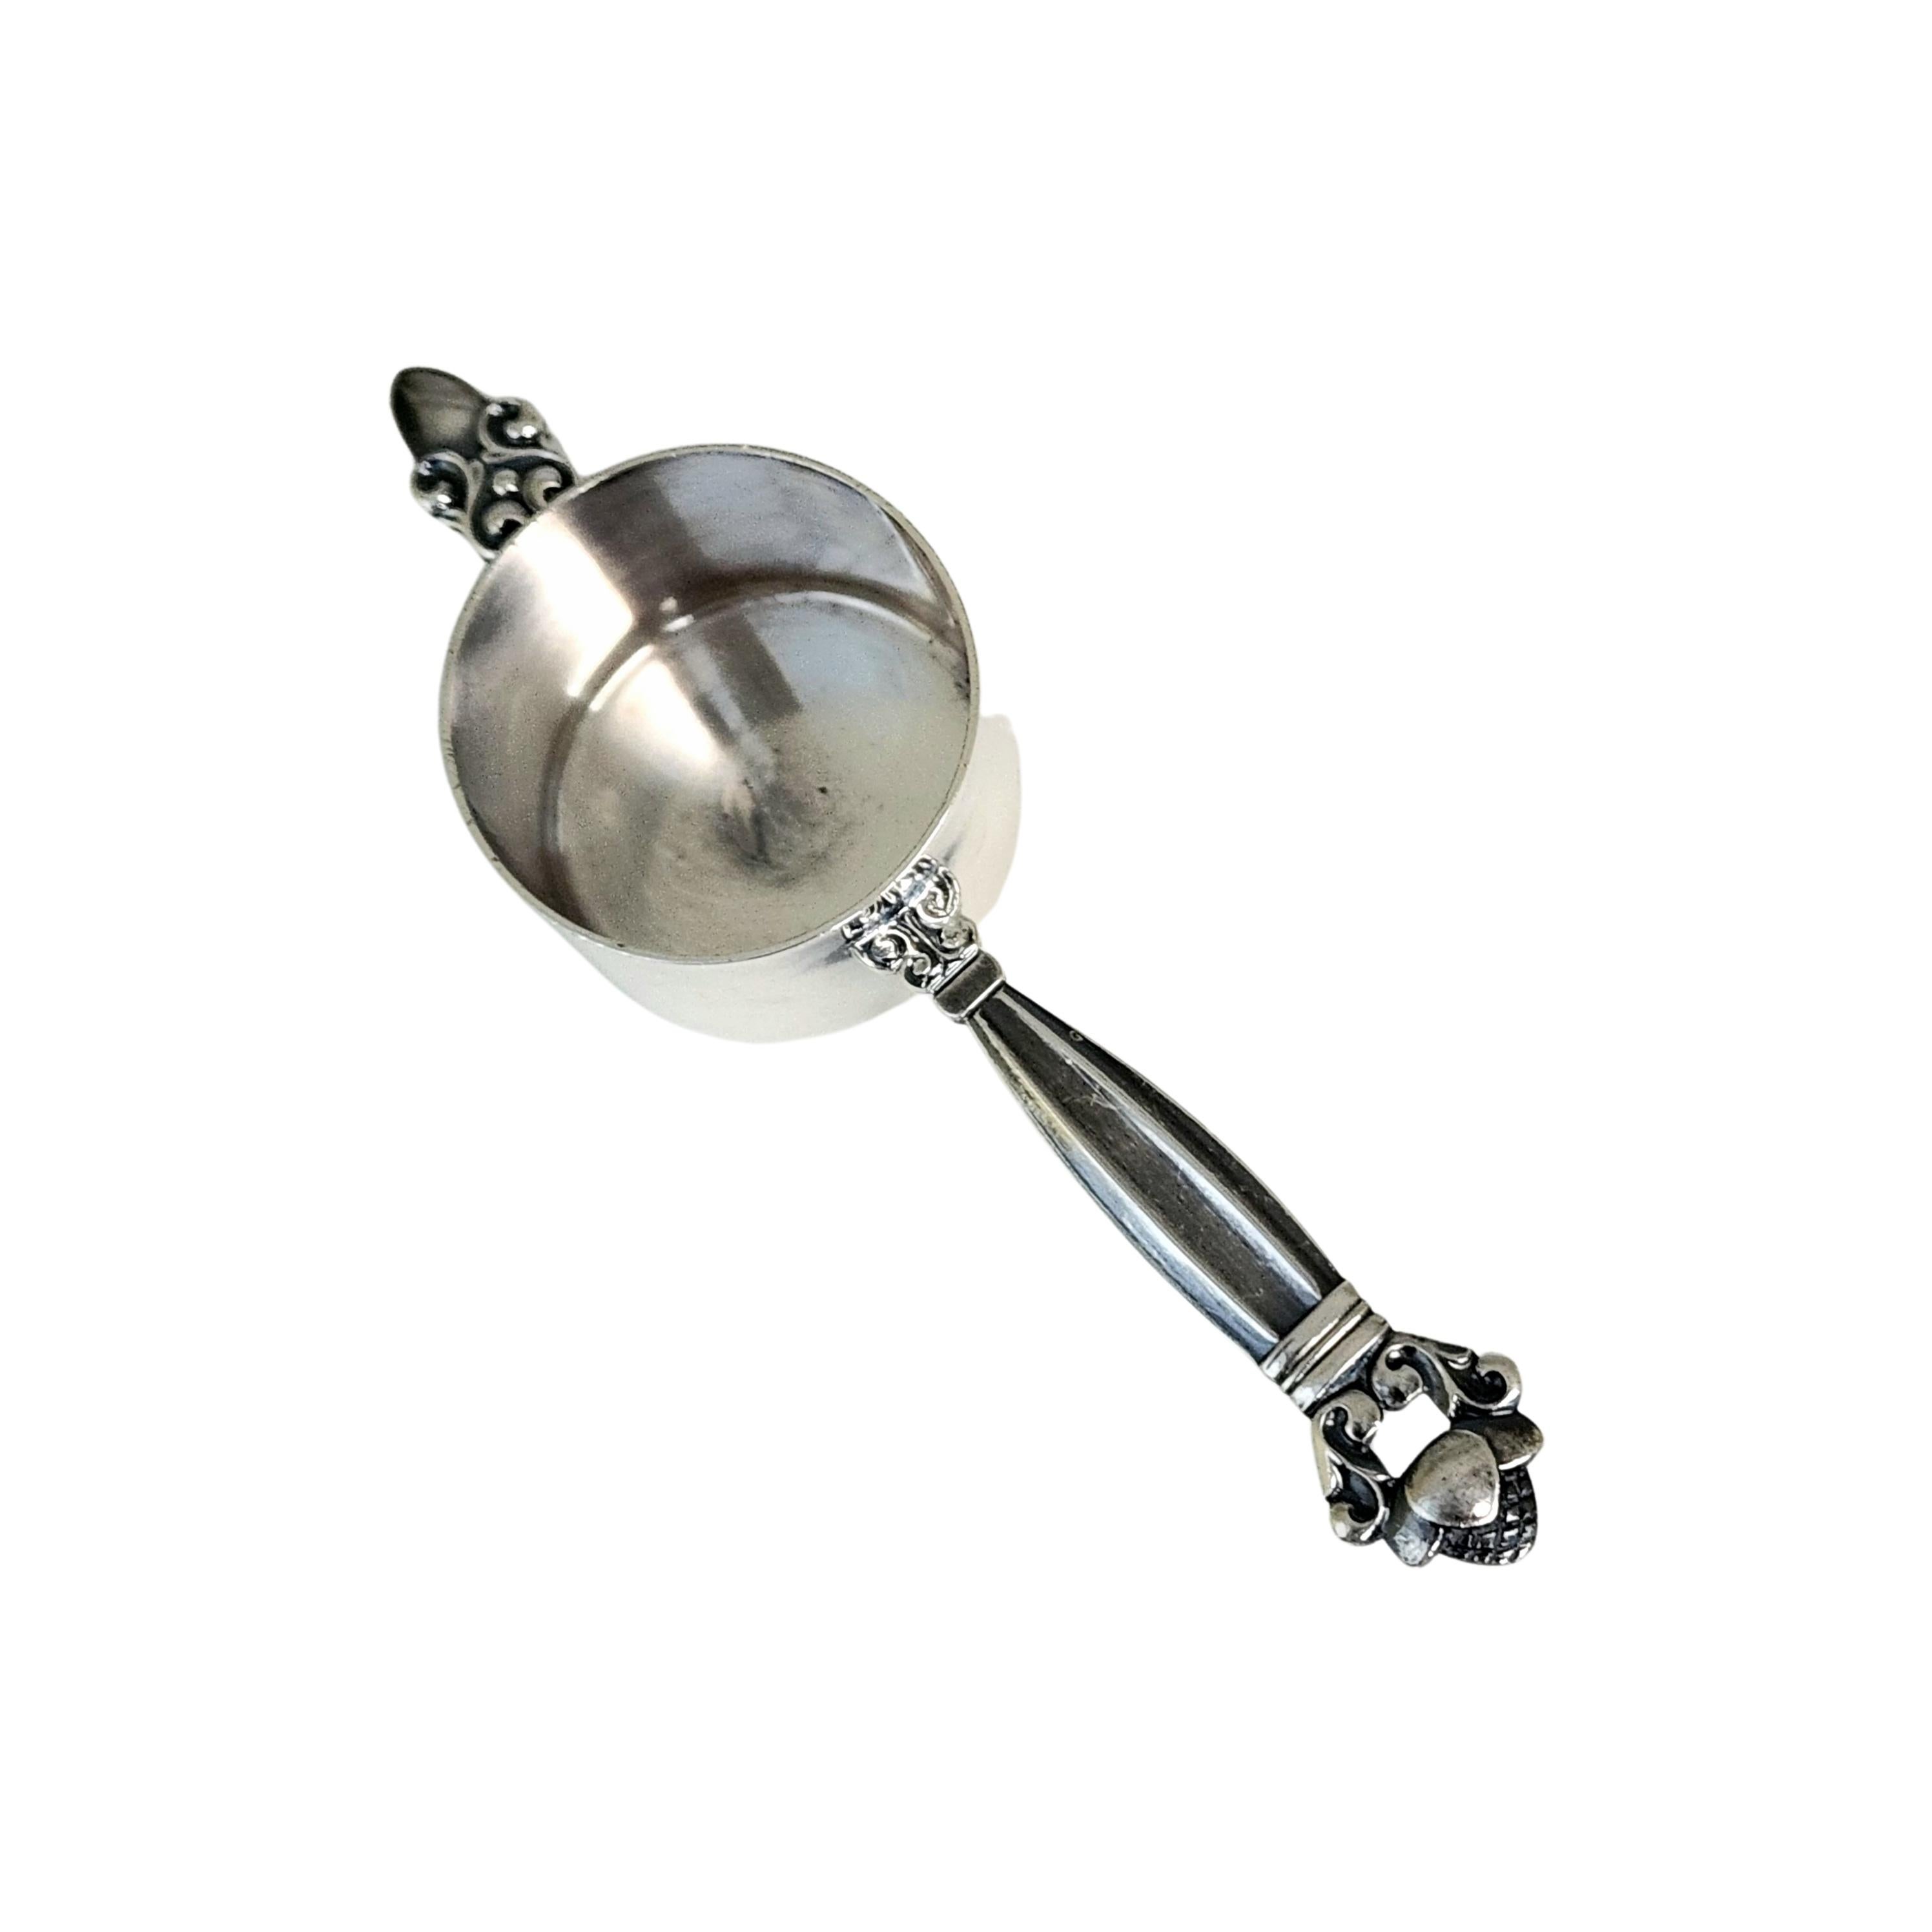 Sterling silver drink measurer jigger #662 in the Acorn pattern designed by Johan Rohde for Georg Jensen of Denmark.

The Acorn pattern was introduced in 1915 as a collaboration between Georg Jensen and designer Johan Ronde. The Acorn pattern, which